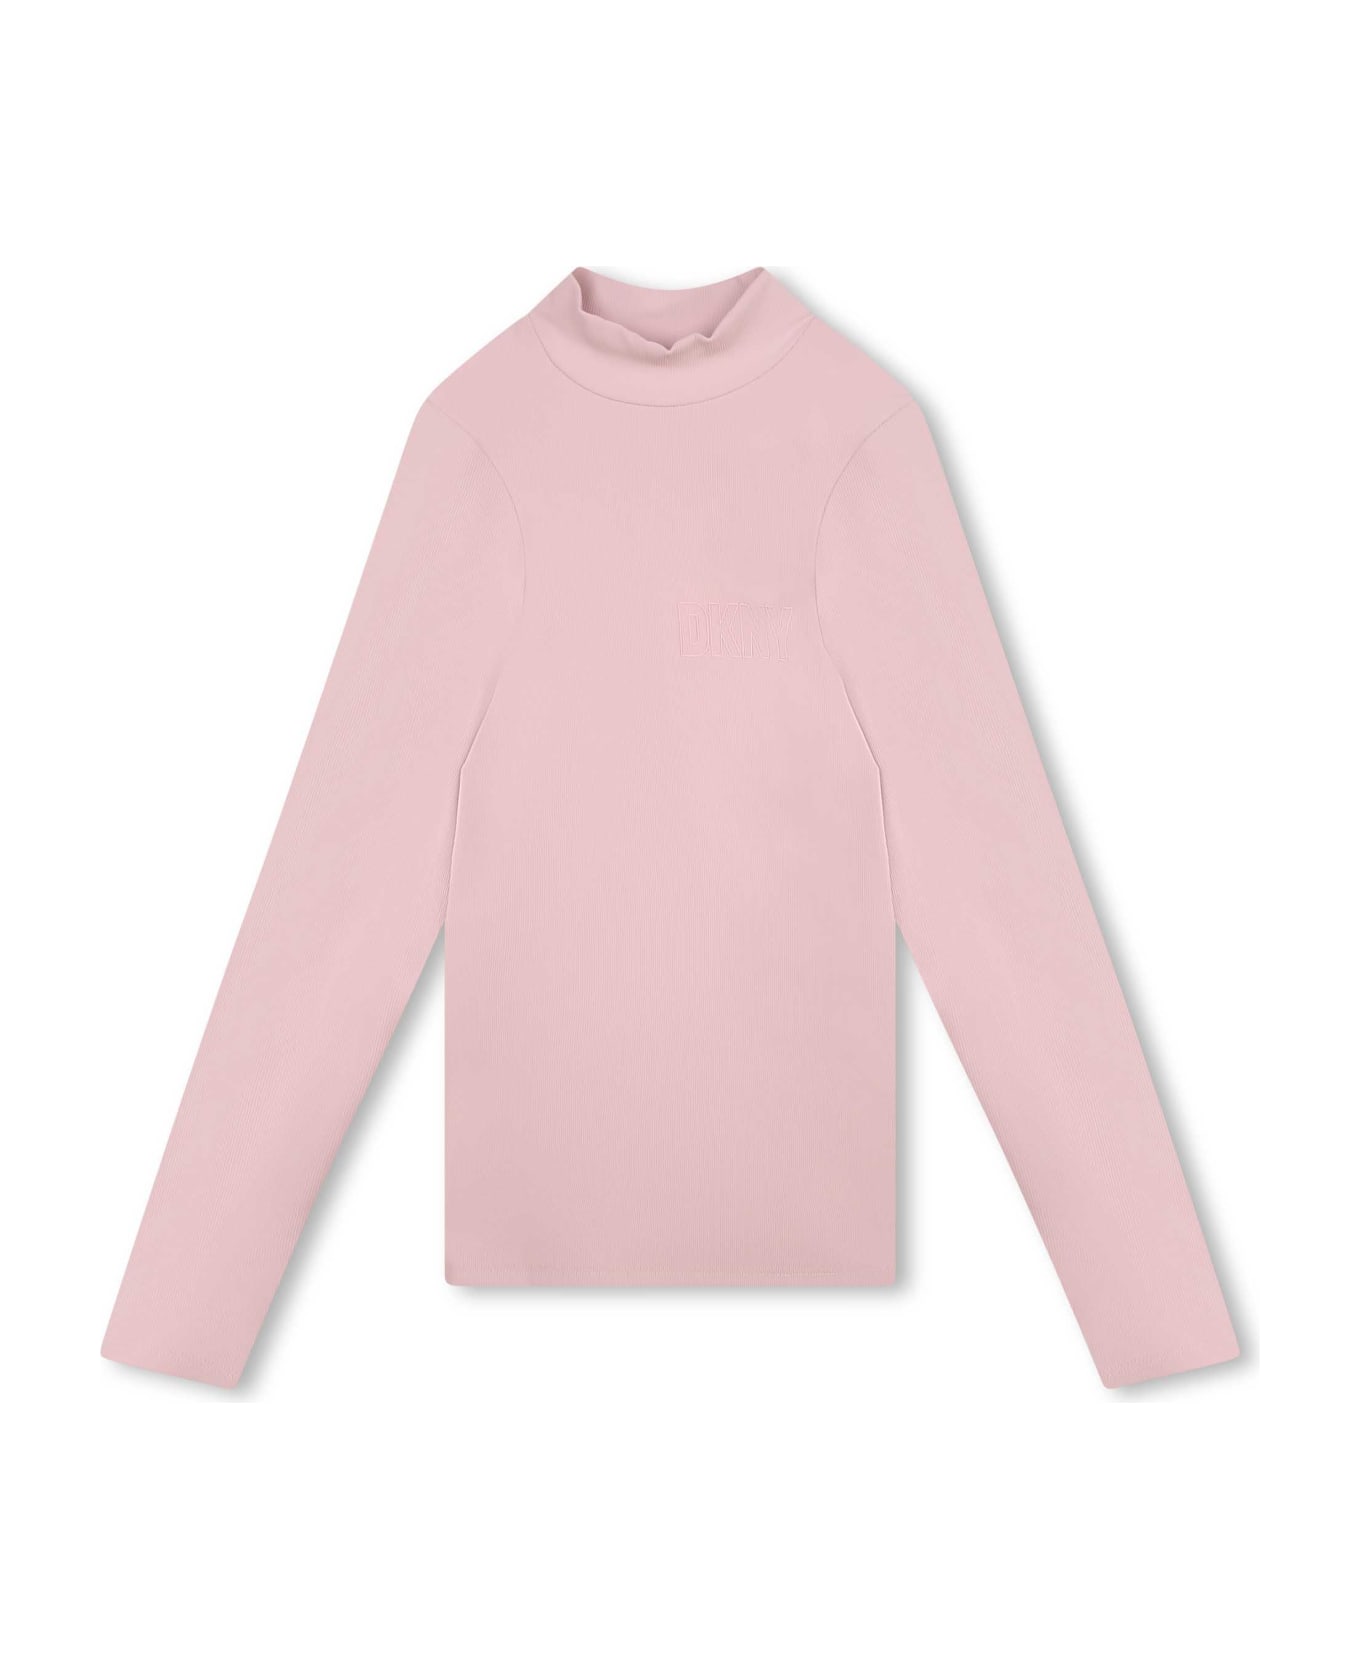 DKNY High Neck Sweatshirt With Embroidery - Pink